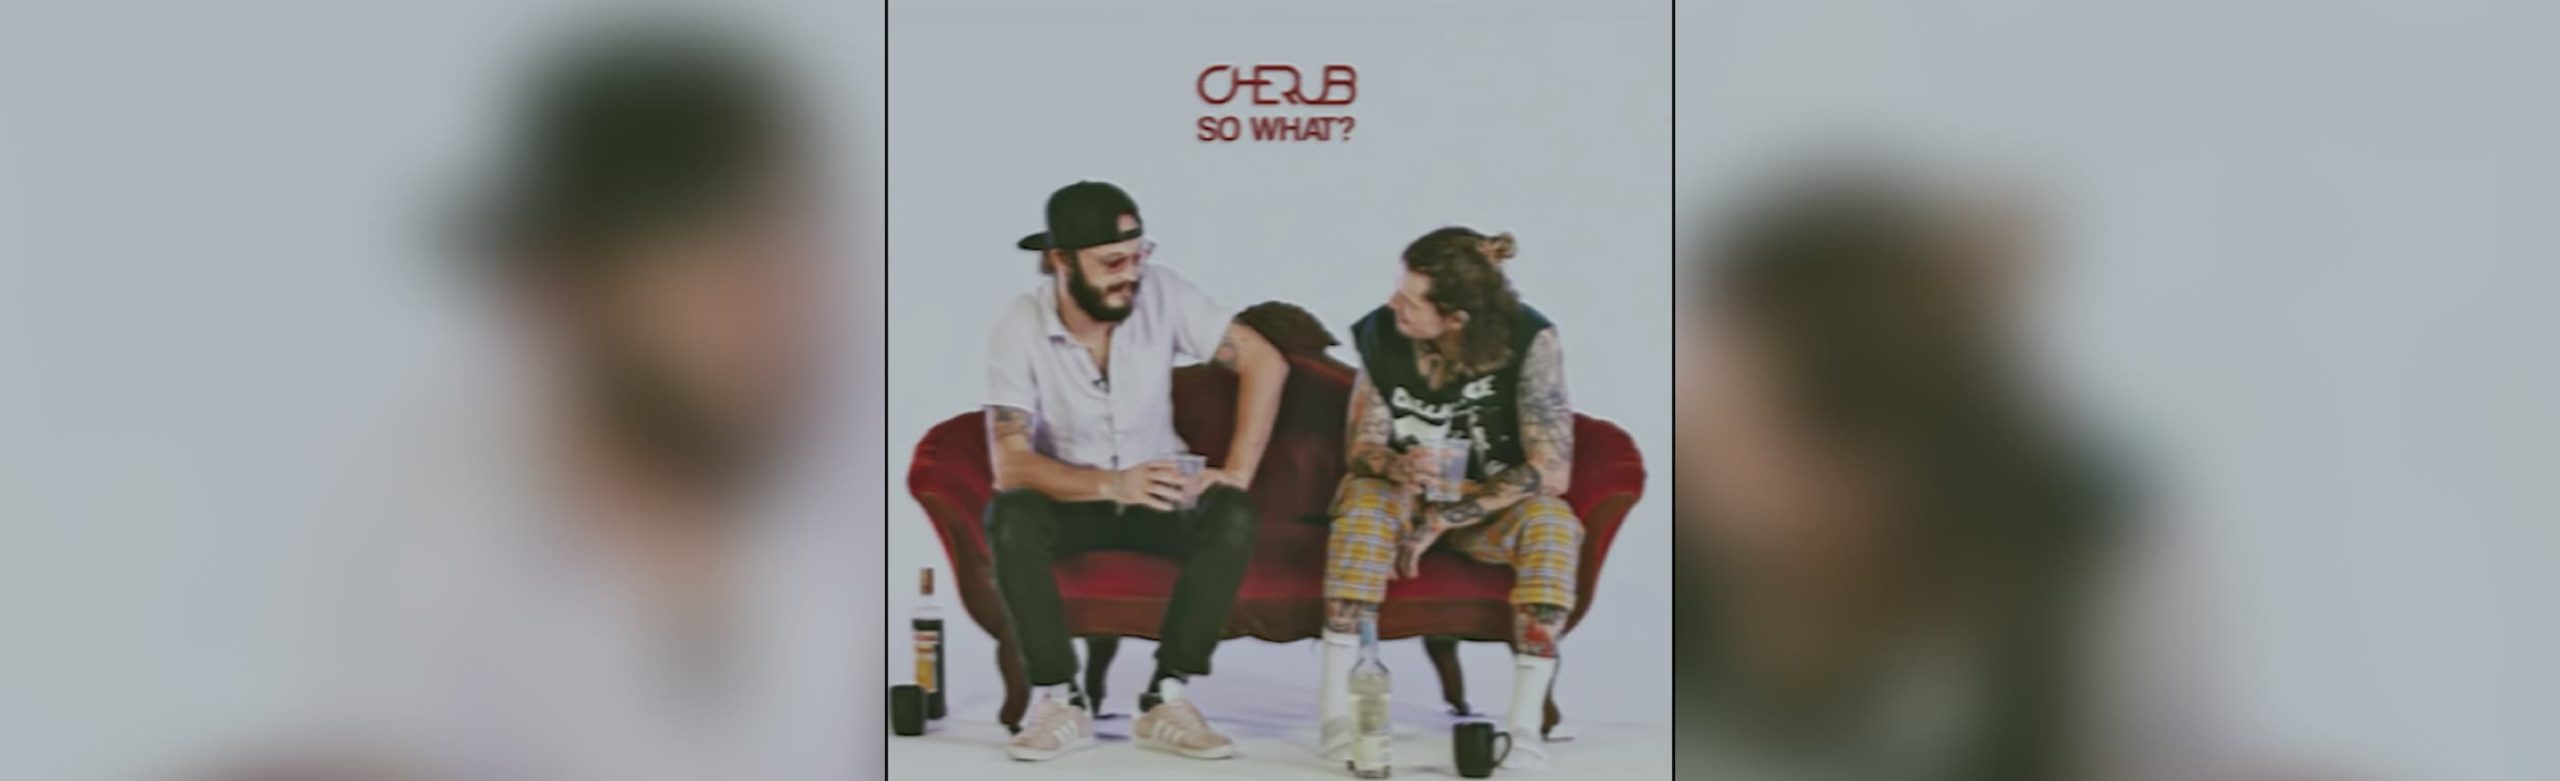 Cherub Asks “So What?” on New Track Image